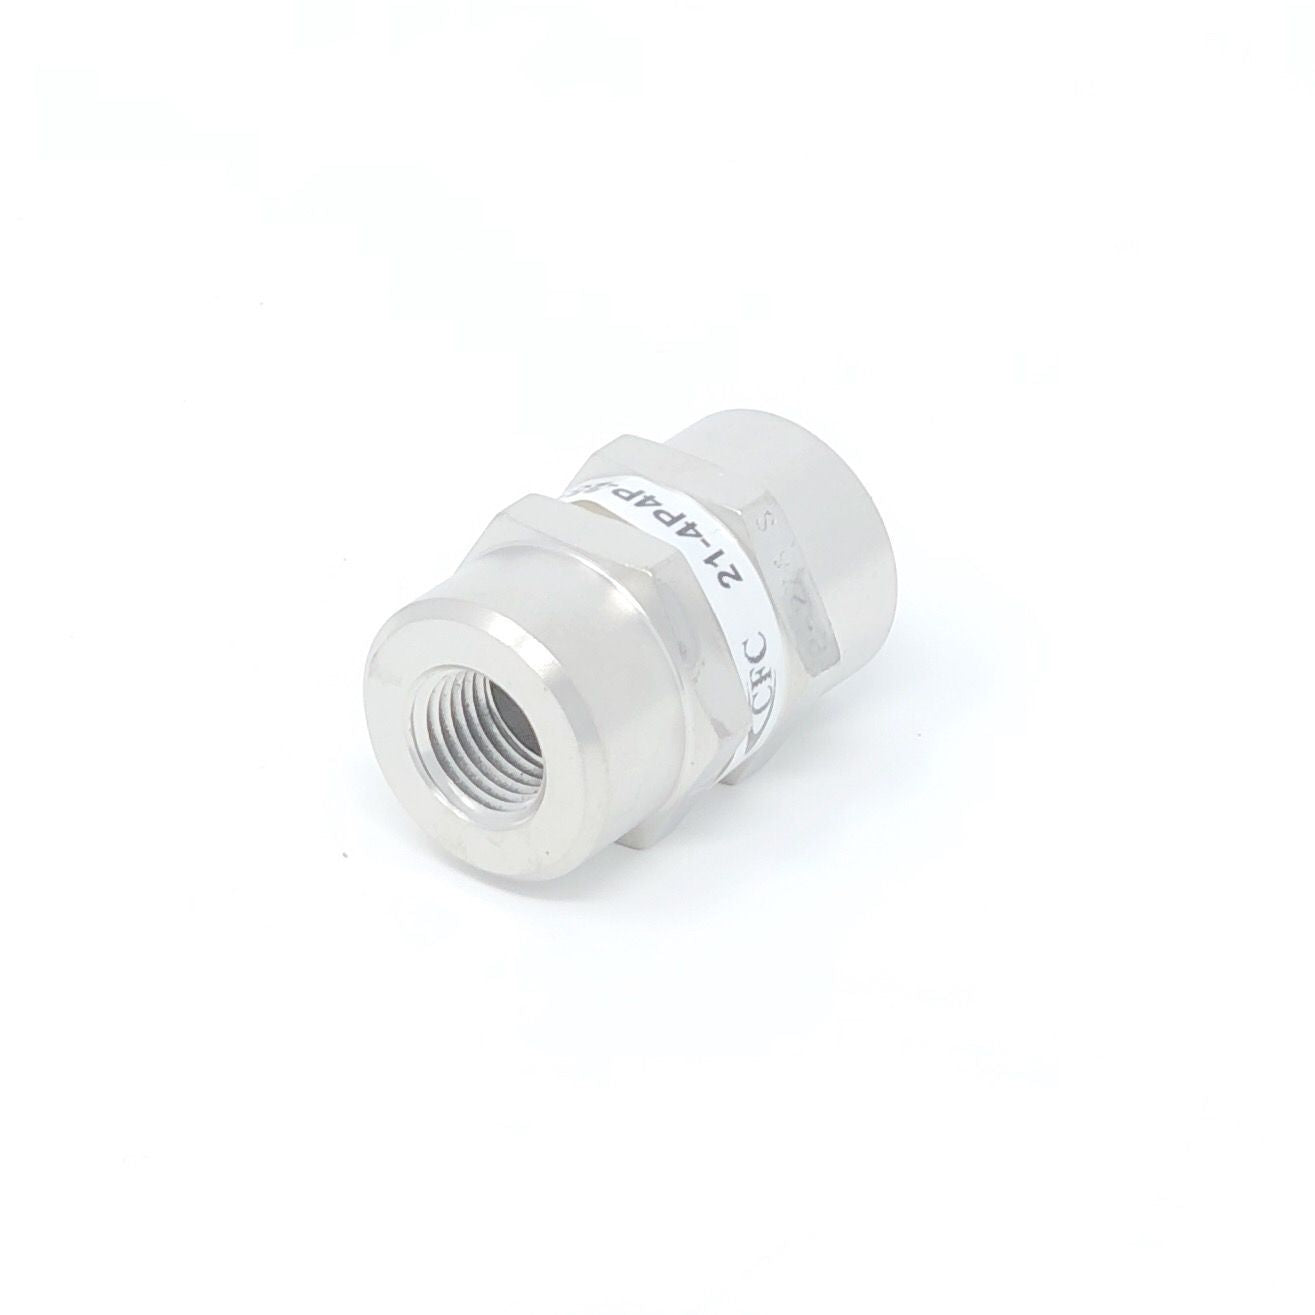 21-8N8N-18S : Chase High Pressure Inline Filter, 3000psi, 1/2" NPT, 18 Micron, No Visual Indicator, No Bypass